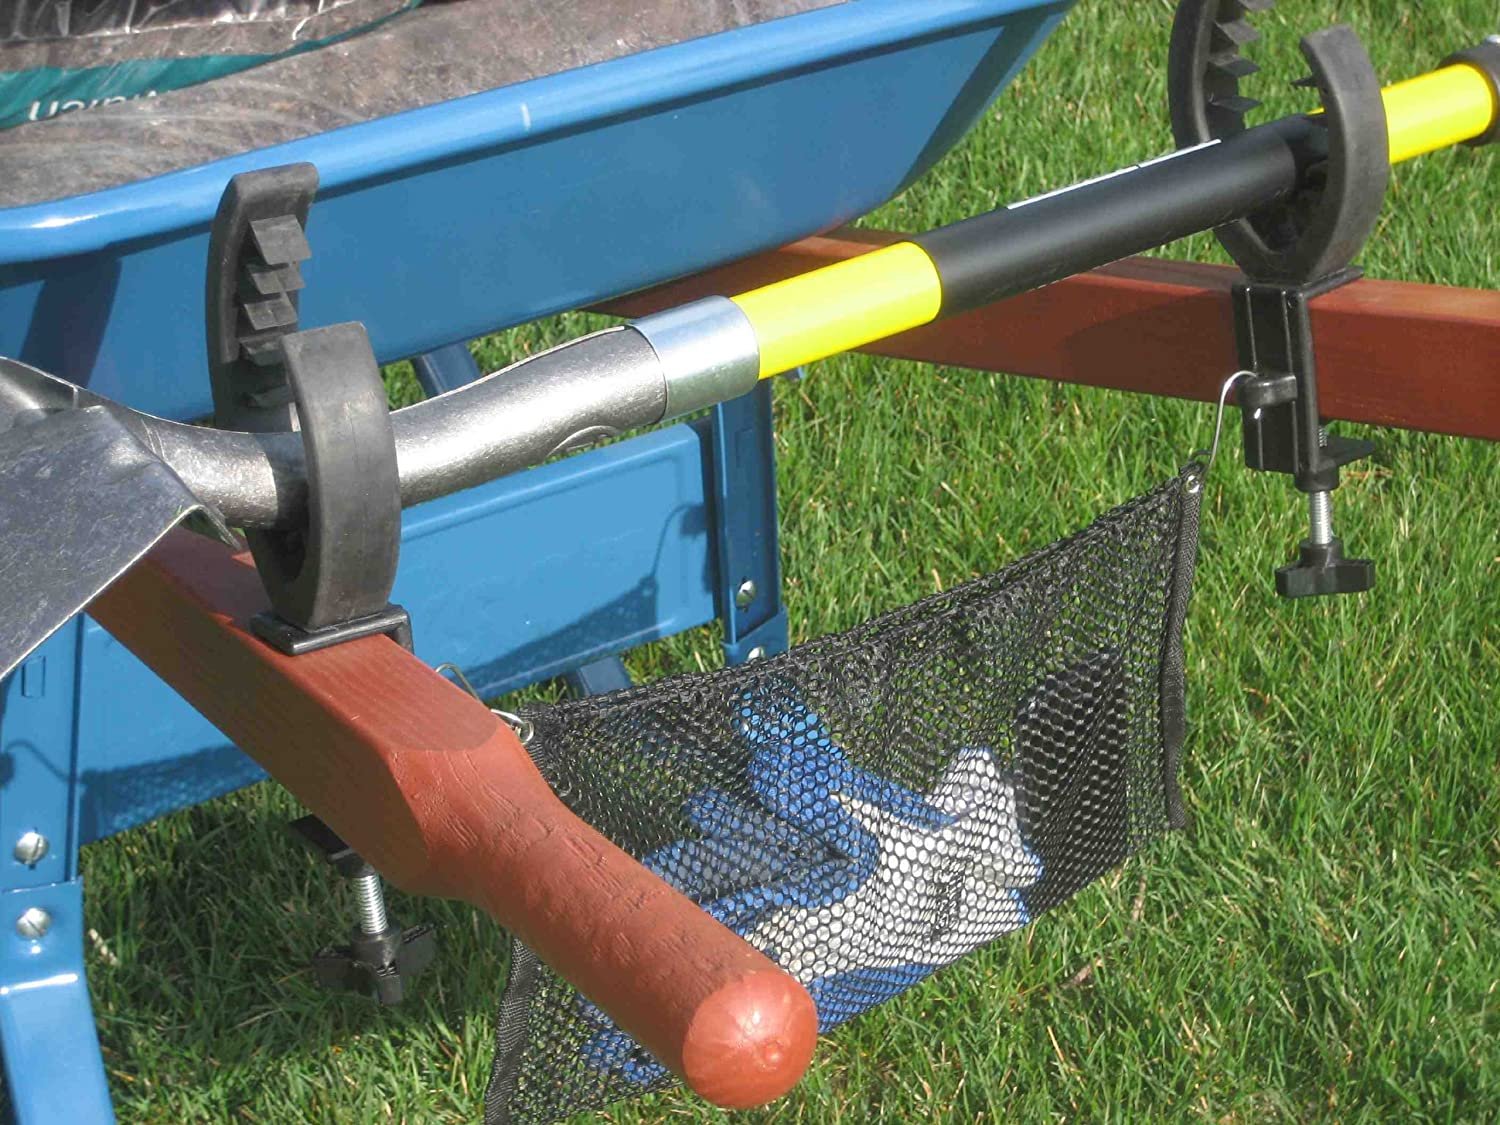 Grizzly Grip Wheelbarrow Tool Holder with Mesh Bag, Secures Tools To Wheelbarrow - image 2 of 5